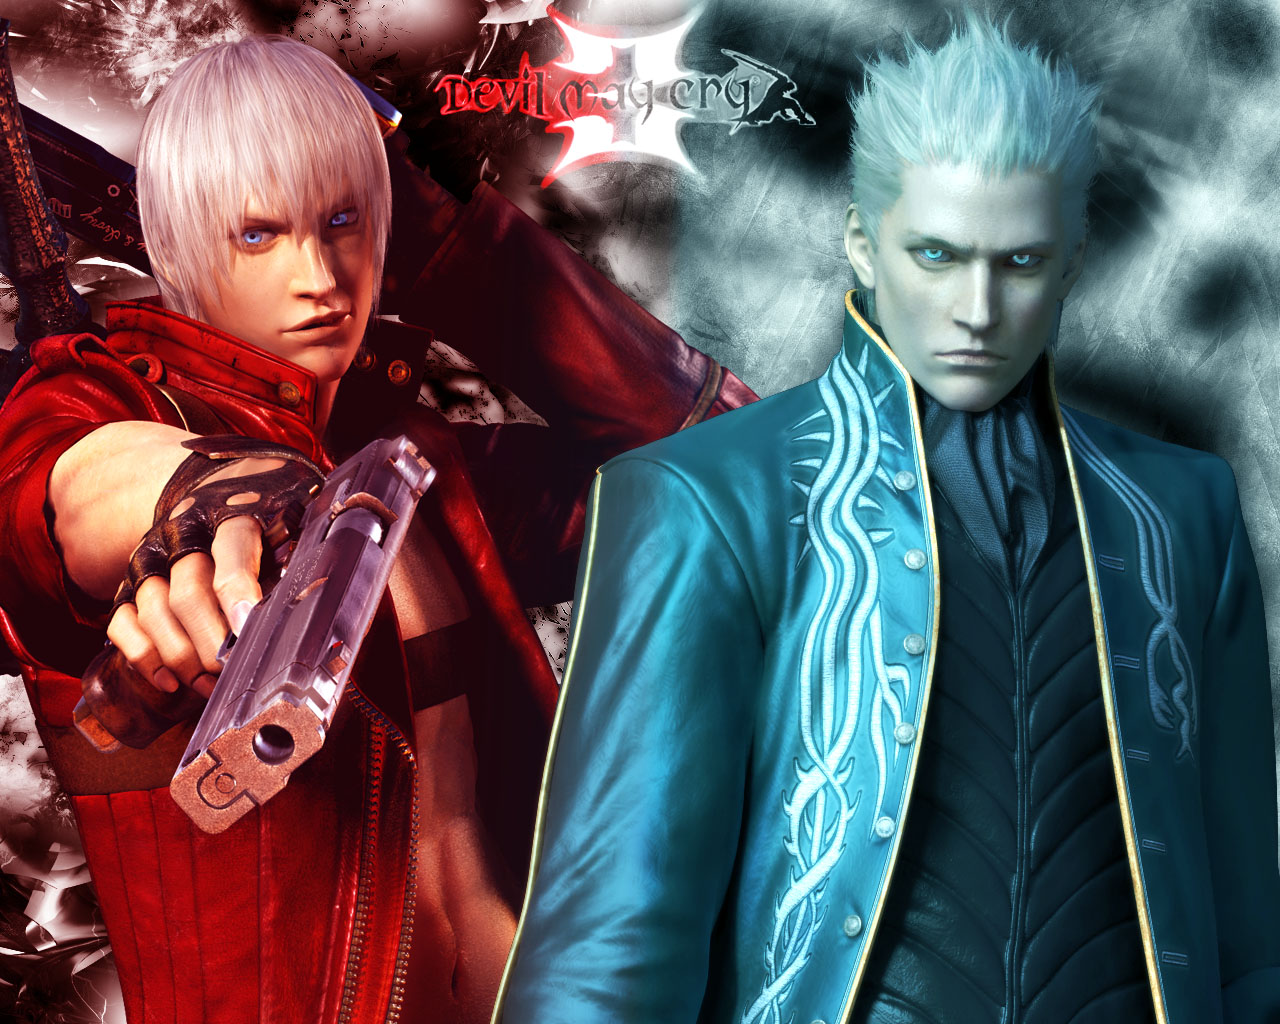 Devil may cry game. Данте Devil May Cry. DMC 3. Данте ДМС 3. Данте Devil May Cry 3.